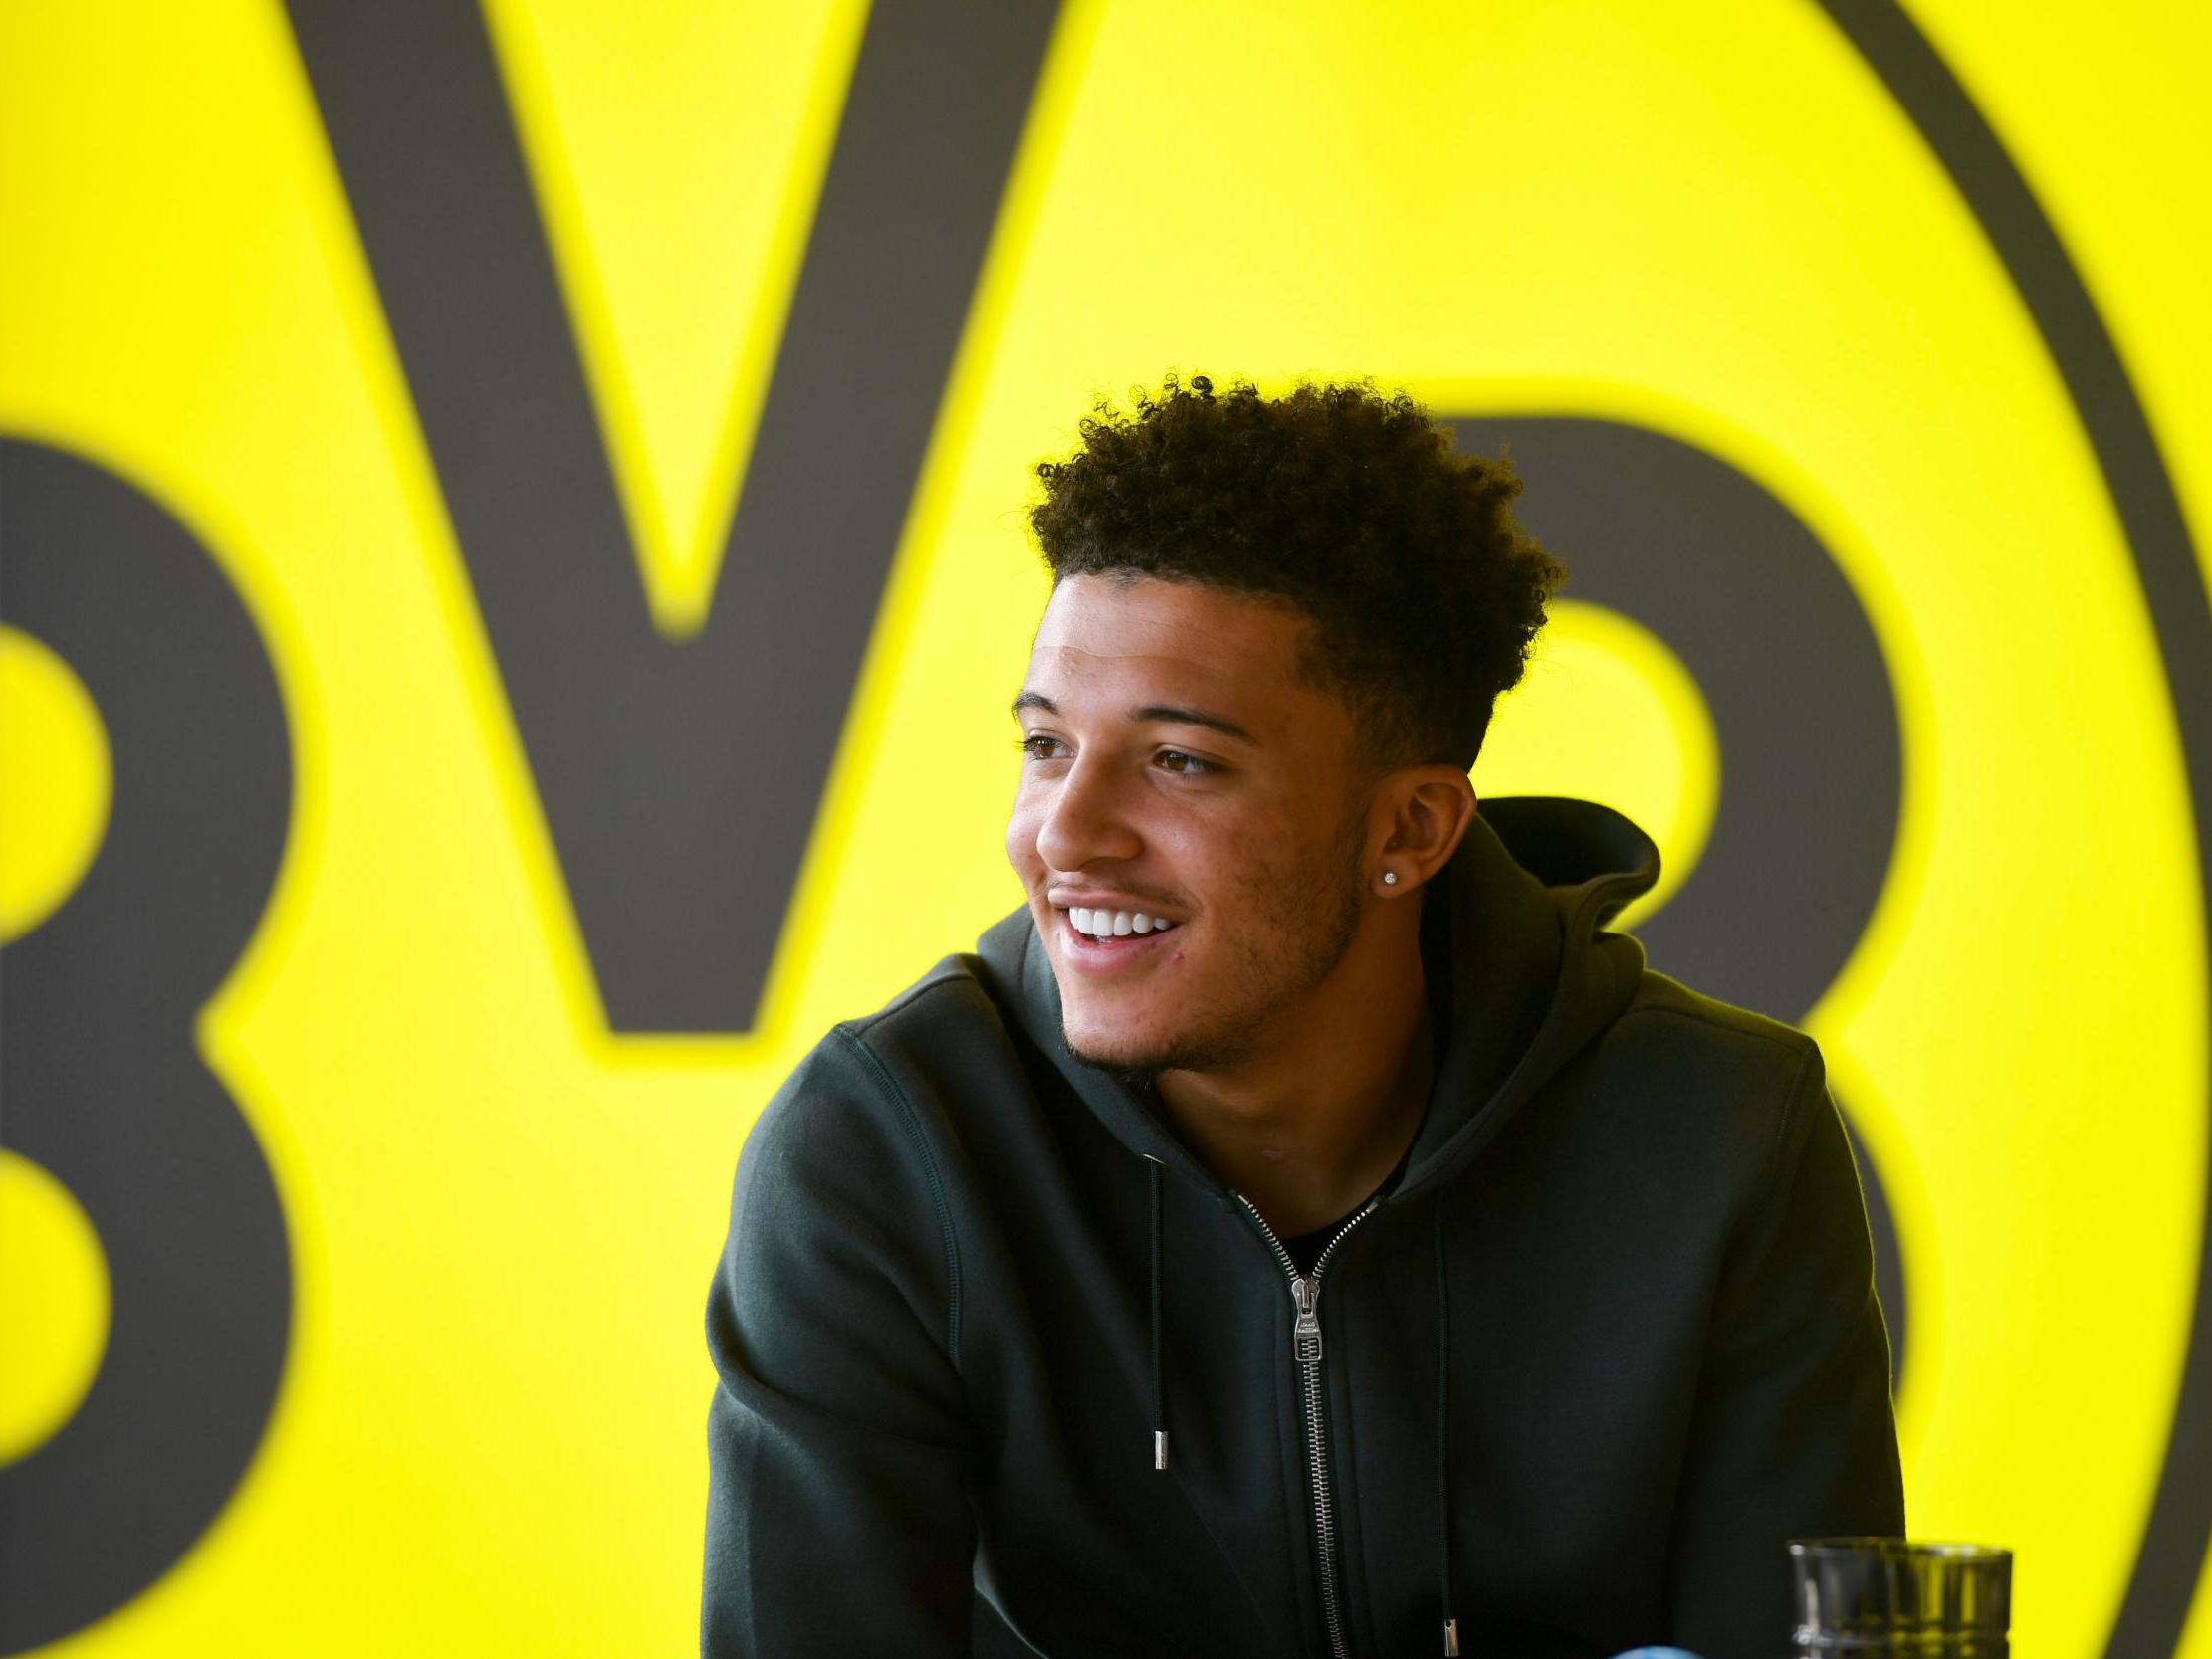 Jadon Sancho is currently treating the German league like his own personal playground, playing better than any other teenager in the game